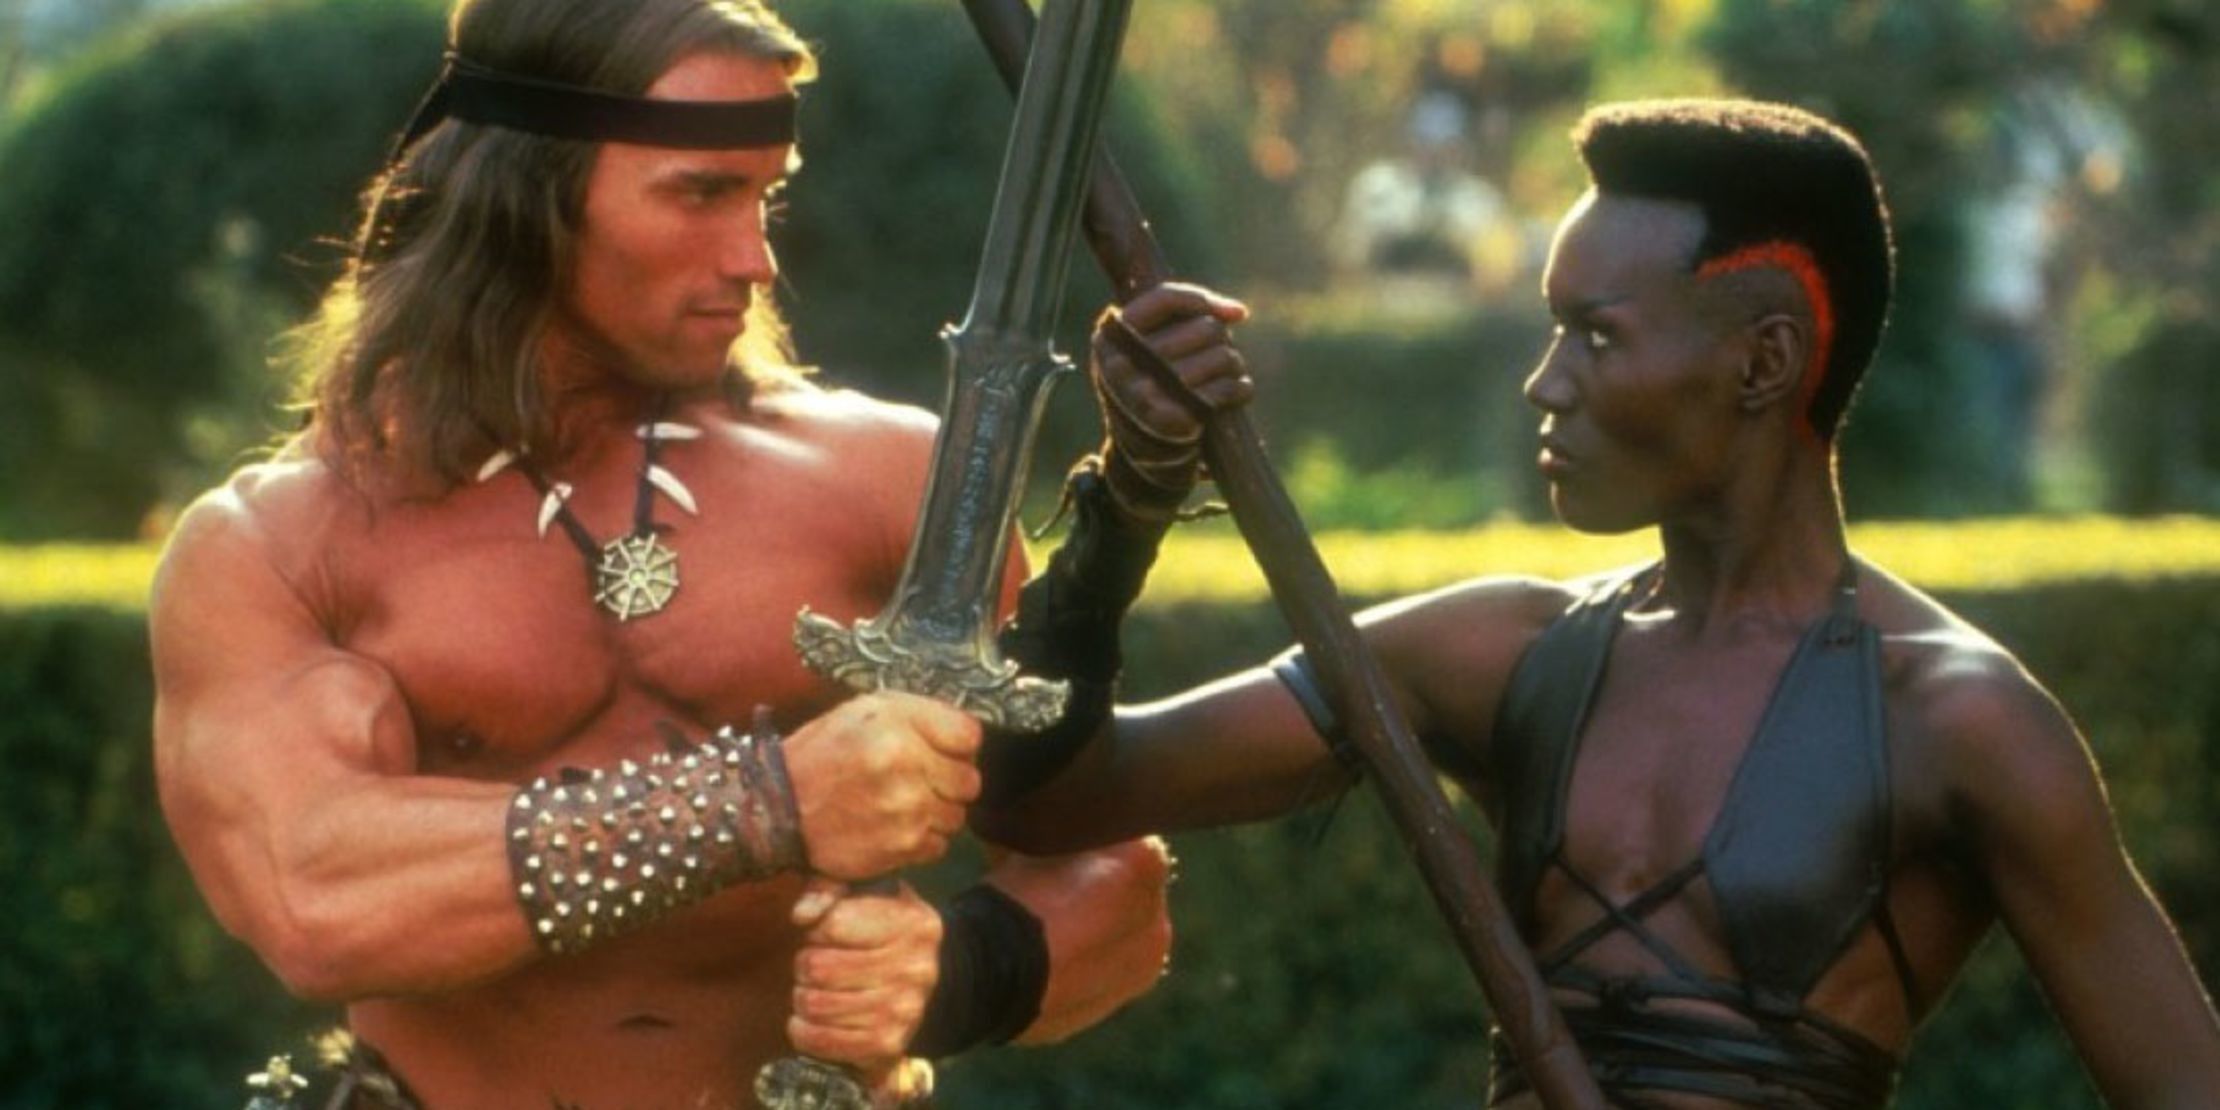 Conan and Zula crossing weapons in publicity still for Conan the Destroyer